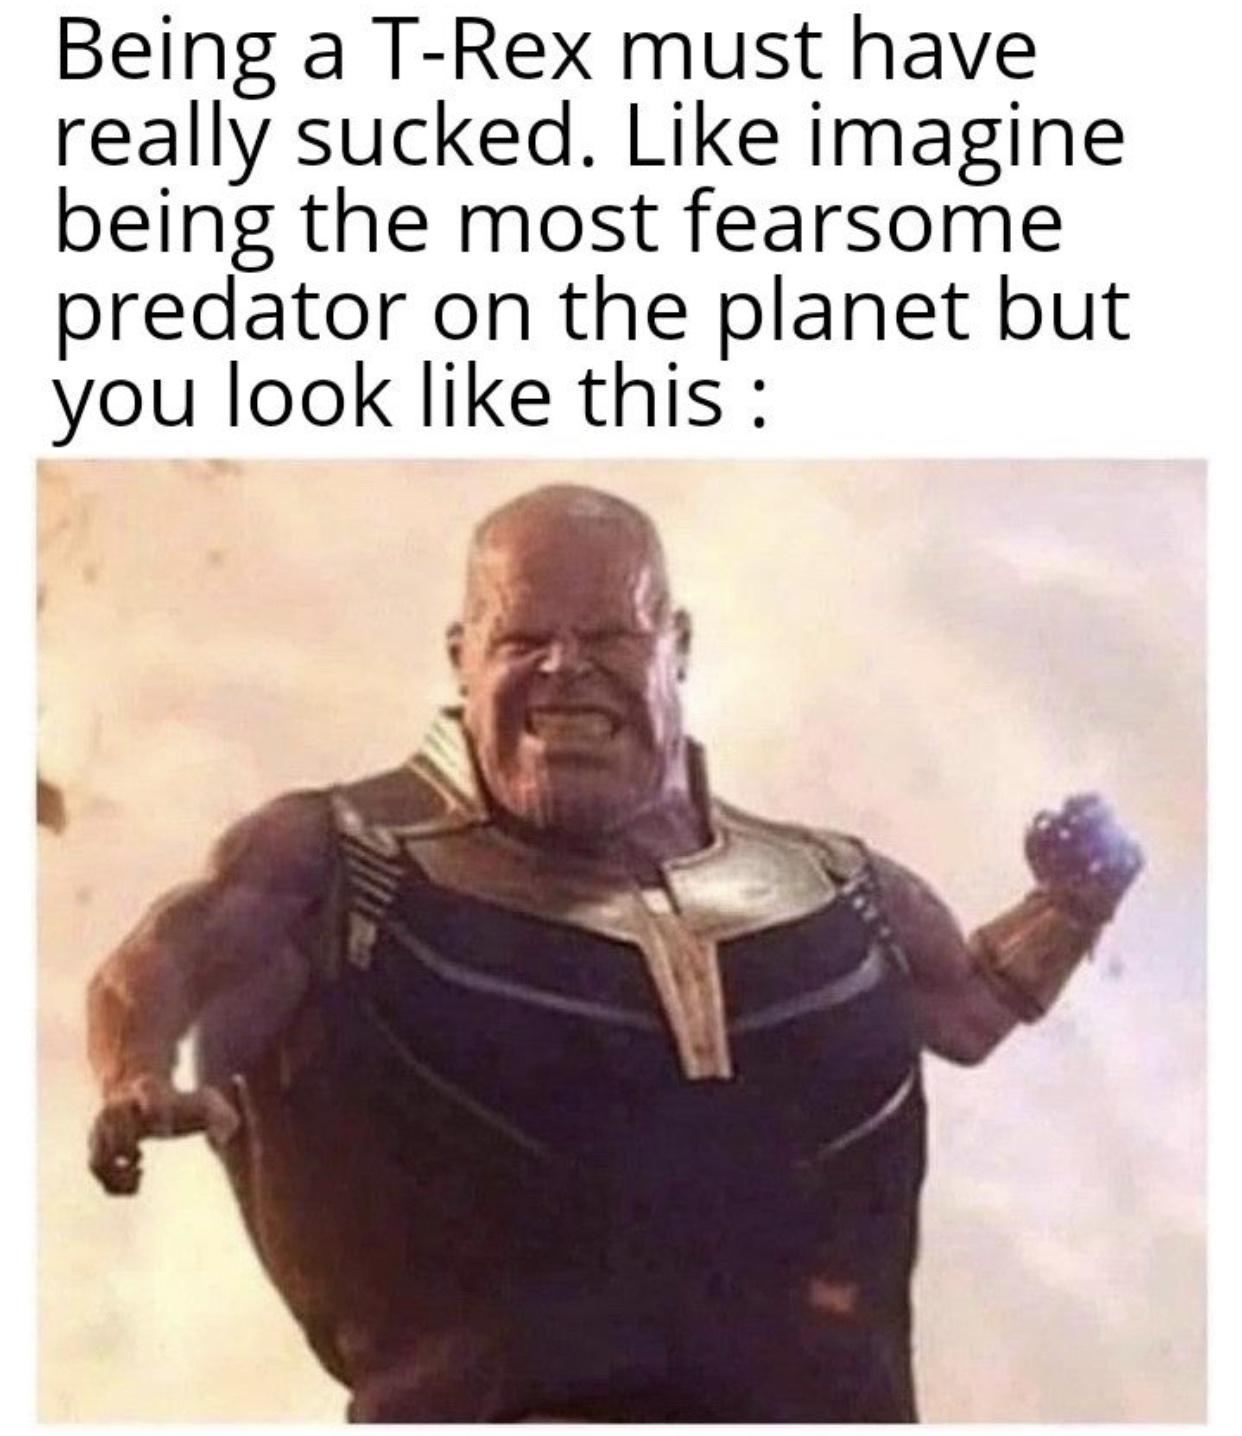 scared thanos meme - Being a TRex must have really sucked. imagine being the most fearsome predator on the planet but you look this